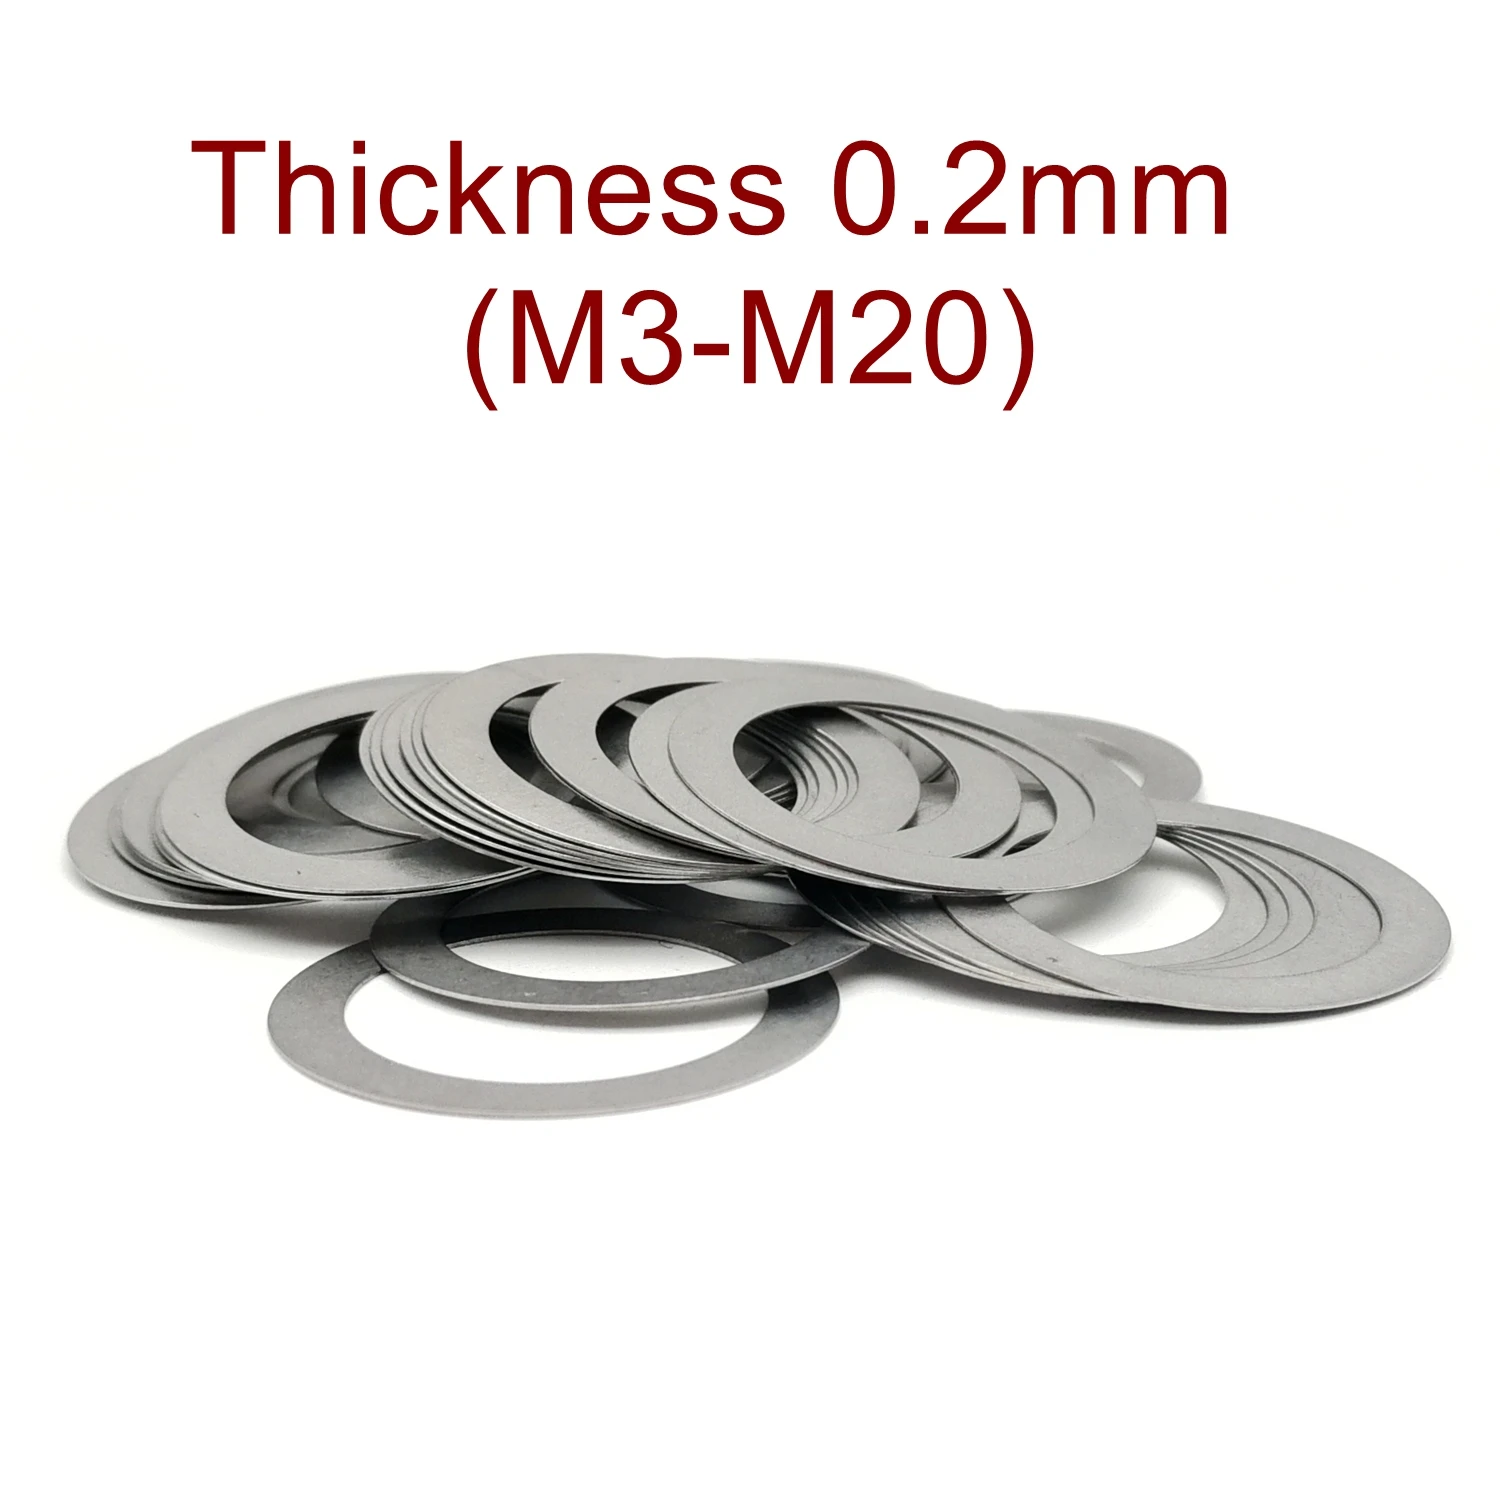 Thickness 0.2mm Stainless steel Flat Washer Ultra thin gasket  High precision Adjusting gasket M3-M50 Thin shim SUS304